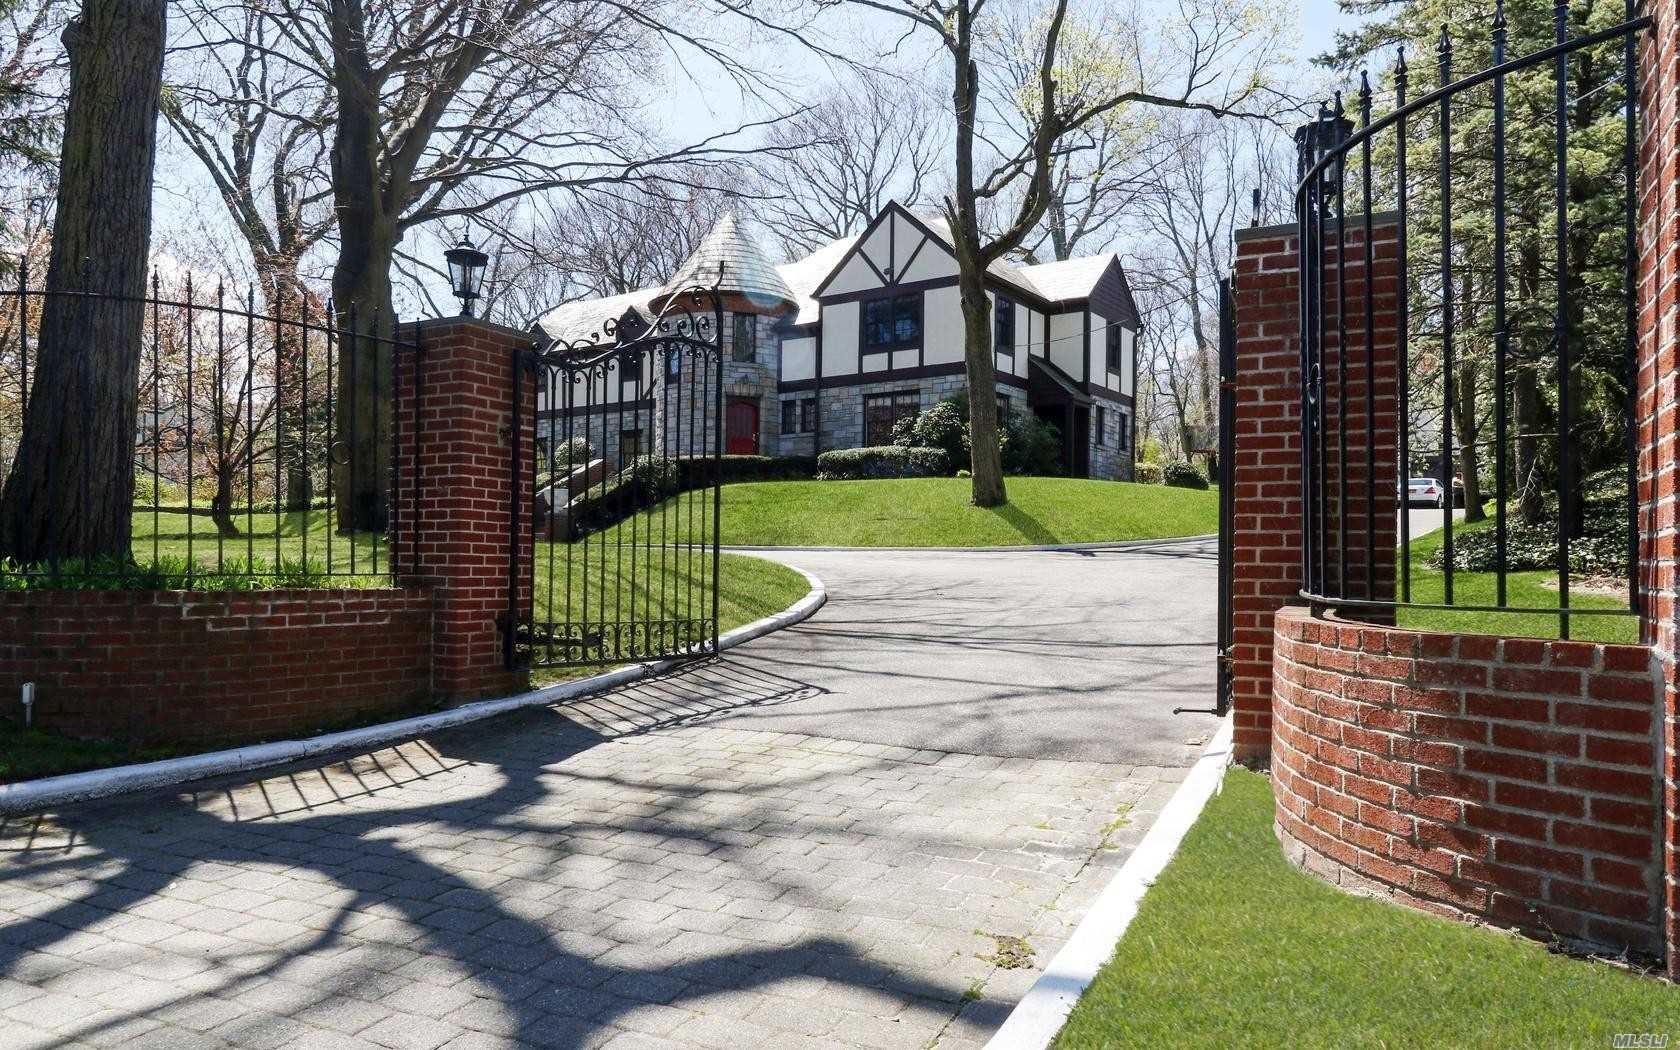 This listing includes a 0.6Ac buildable lot. See separate listings for Land MLS#3153437 & House MLS#3153432. Spectacular Masonry Tudor On 1.79 Acres Of Park-Like Property! Features include Double Gates, Granite & Stained Glass Turret, Vermont Slate Roof, 7BR, 5.5Bth, Including A Separate Guest Cottage, 3 Fireplaces, Full Finished LL W OSE, Blue Stone Patio, Built-In BBQ, & 65&rsquo; In Ground Heated Pool. Roslyn School District. Taxes Grievance in Progress.